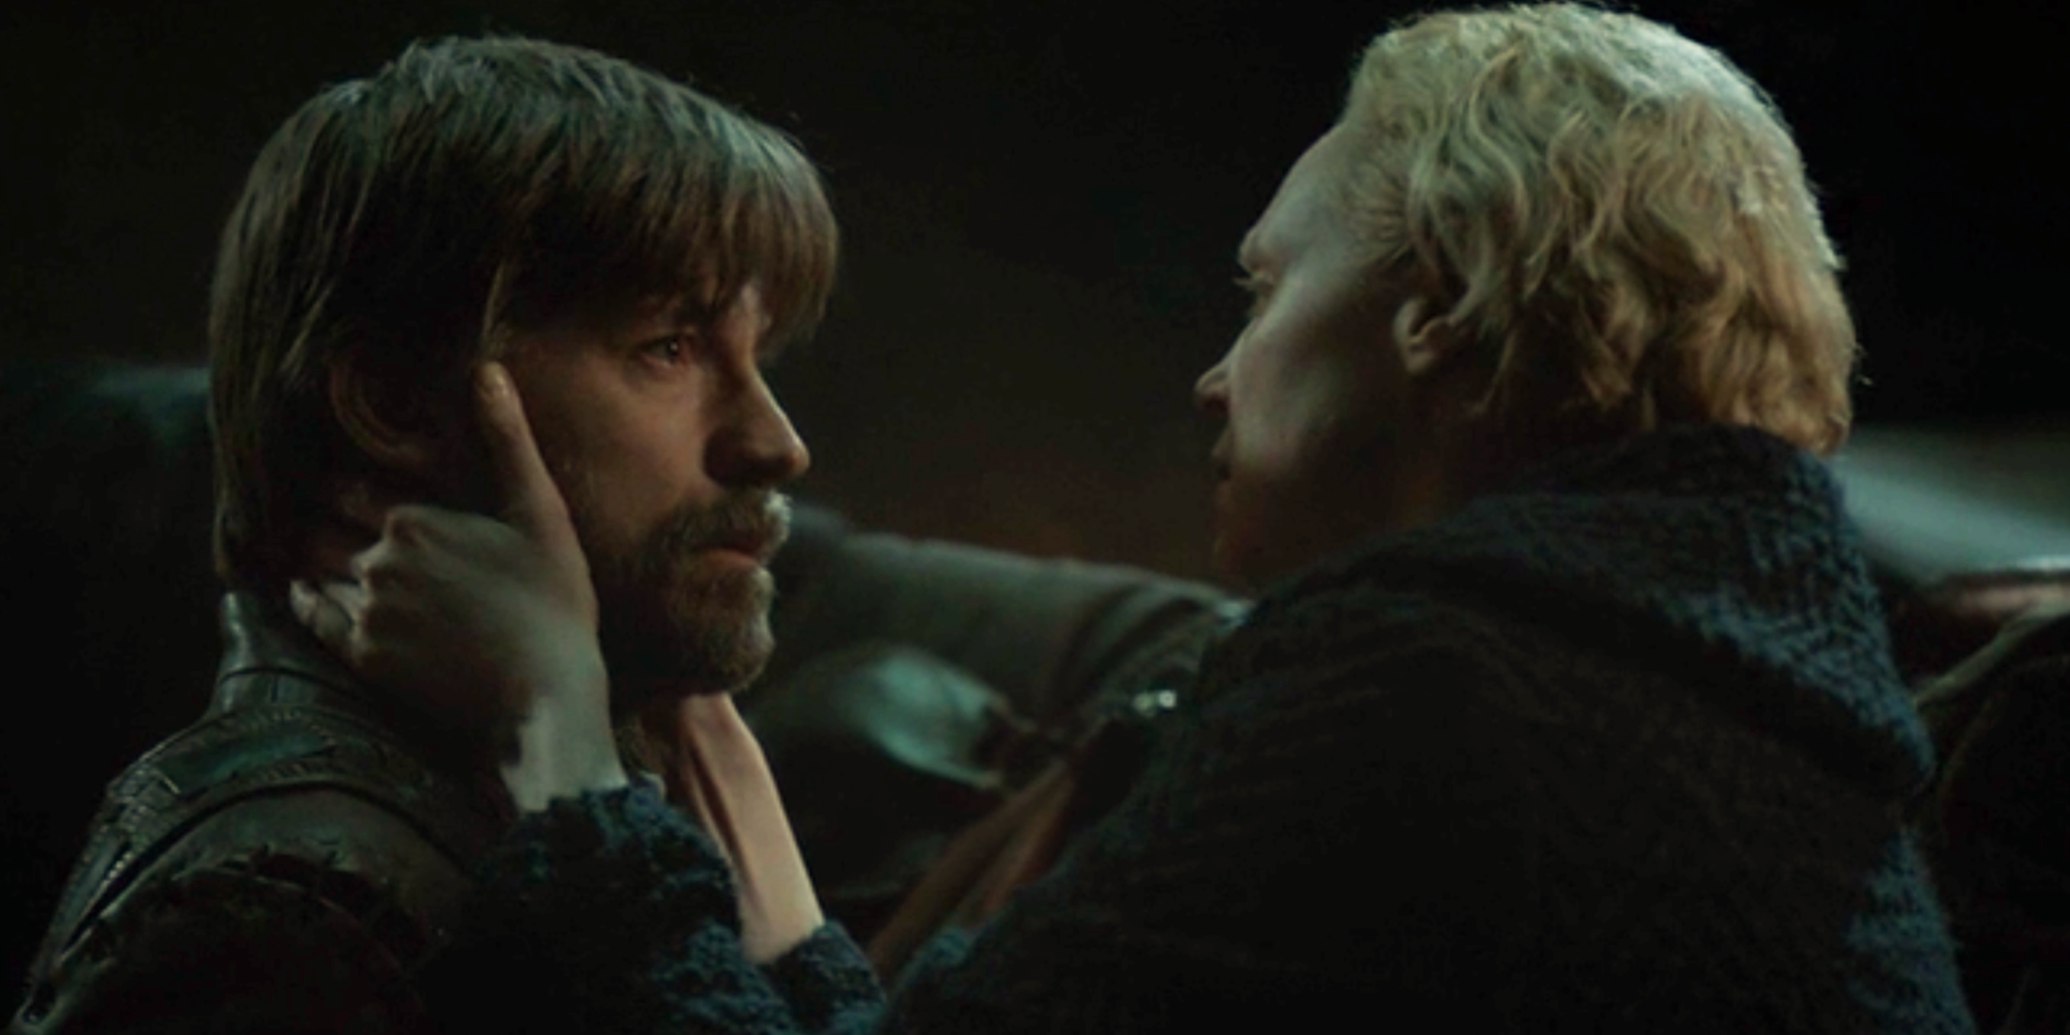 Game of Thrones Jaime and Brienne